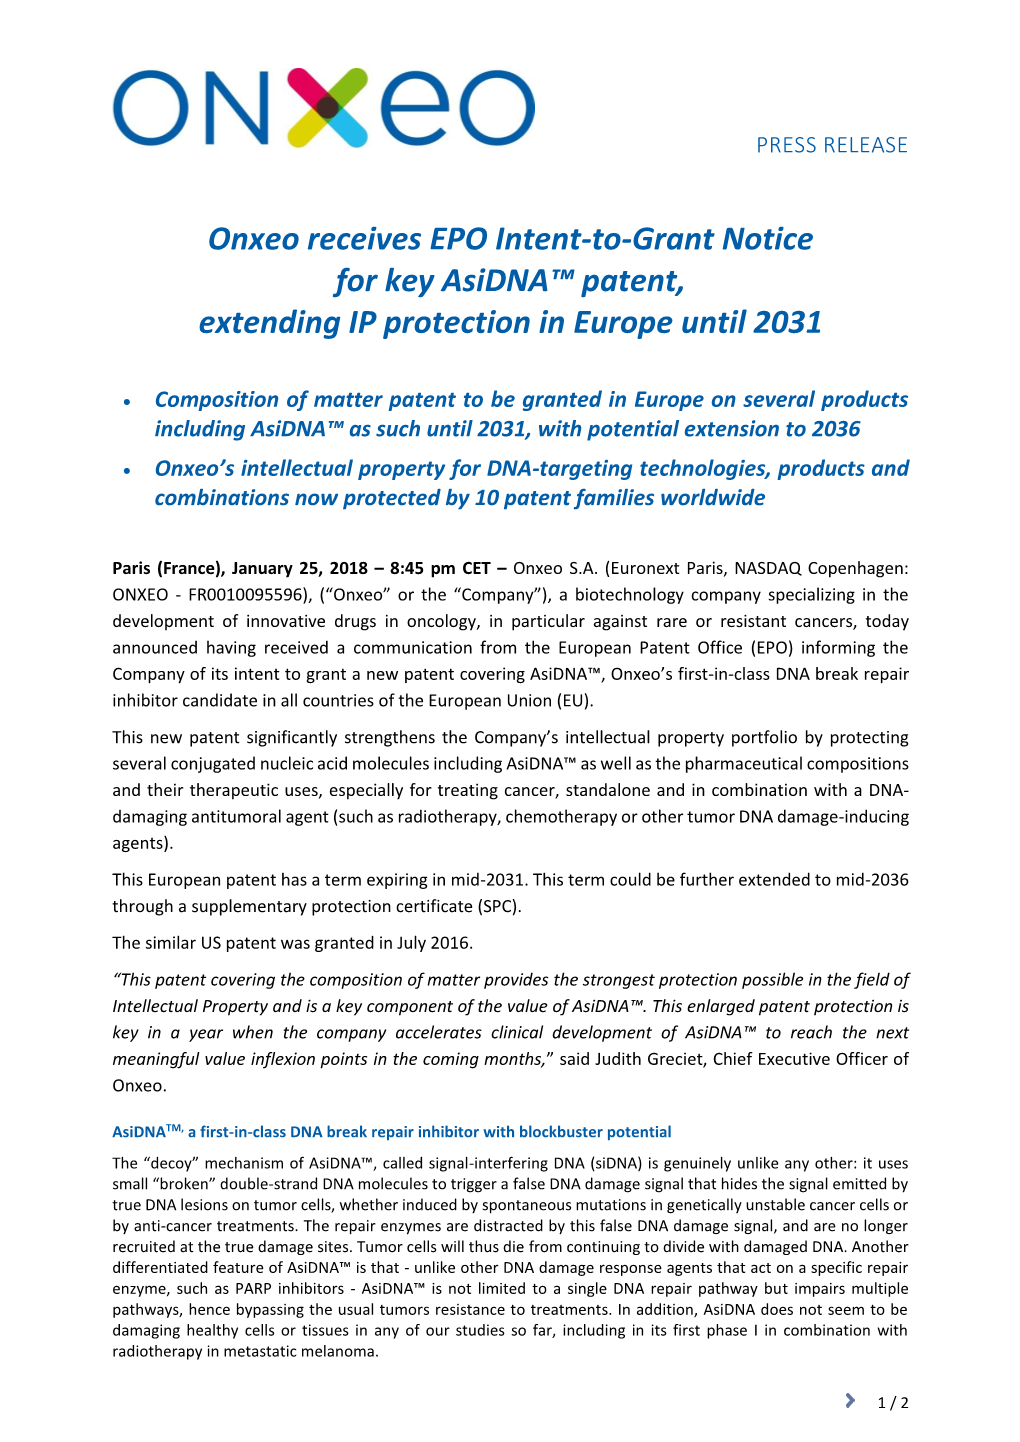 Onxeo Receives EPO Intent-To-Grant Notice for Key Asidna™ Patent, Extending IP Protection in Europe Until 2031